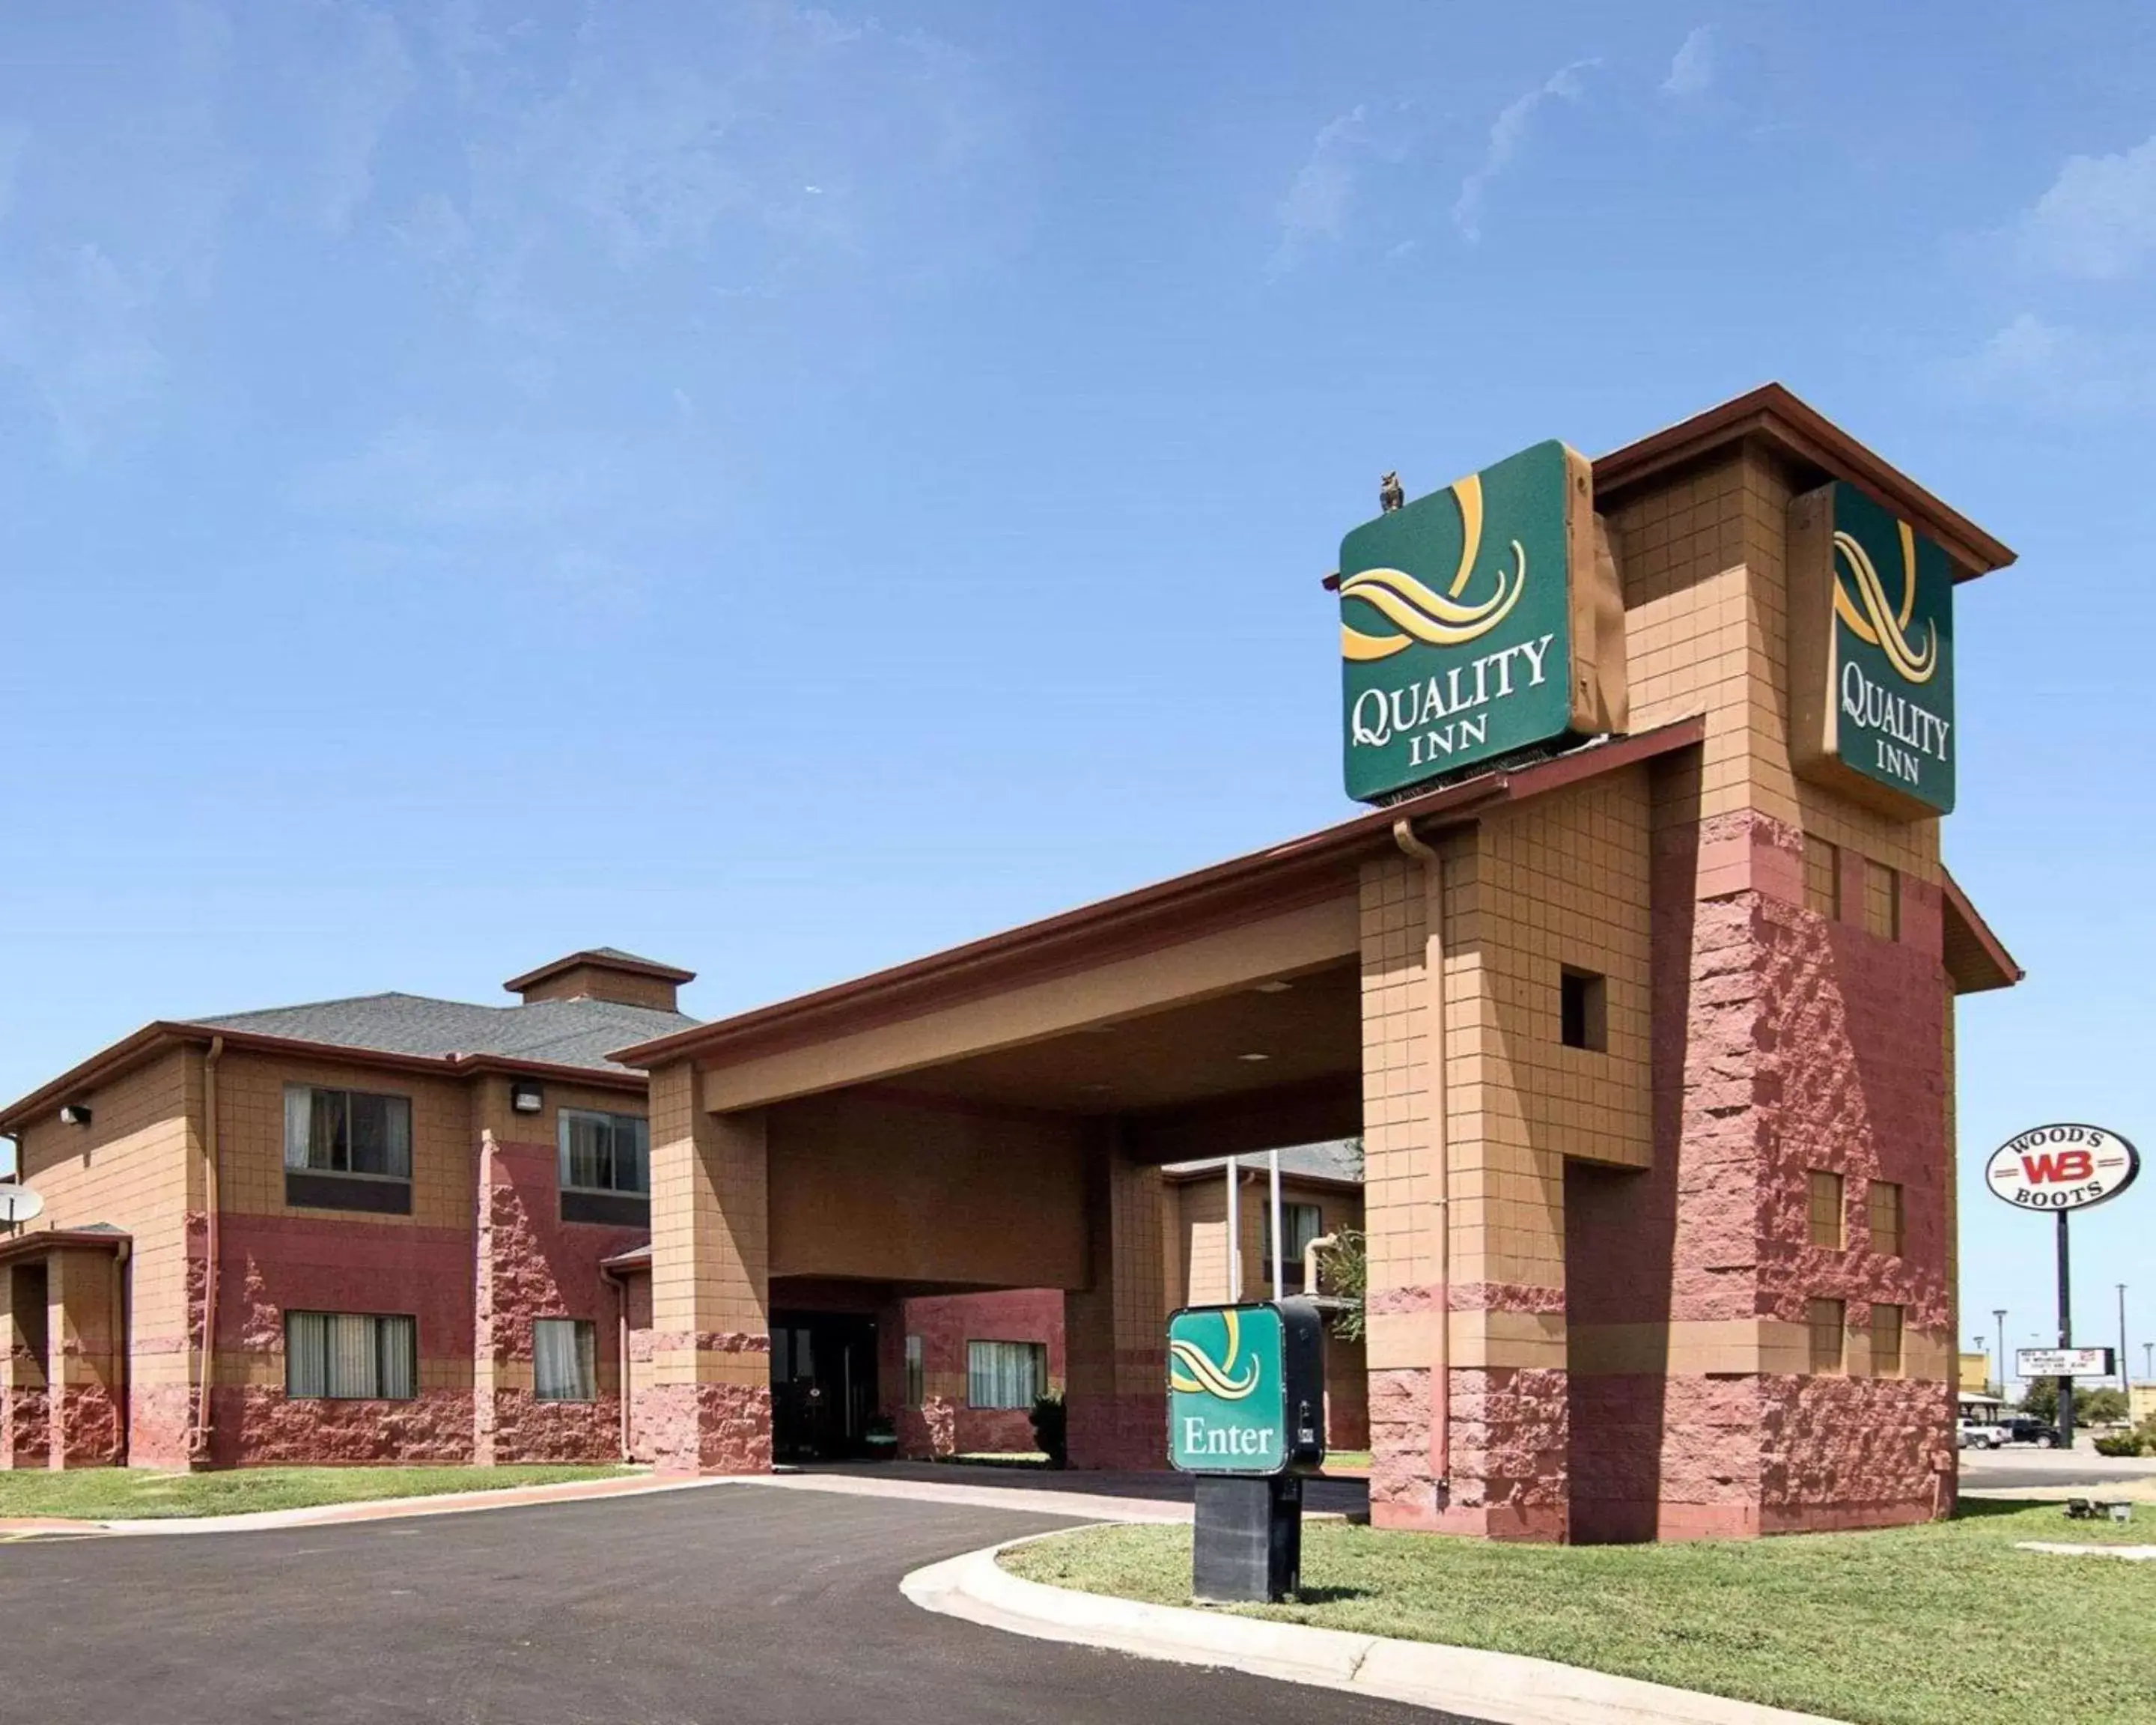 Property building in Quality Inn Midland